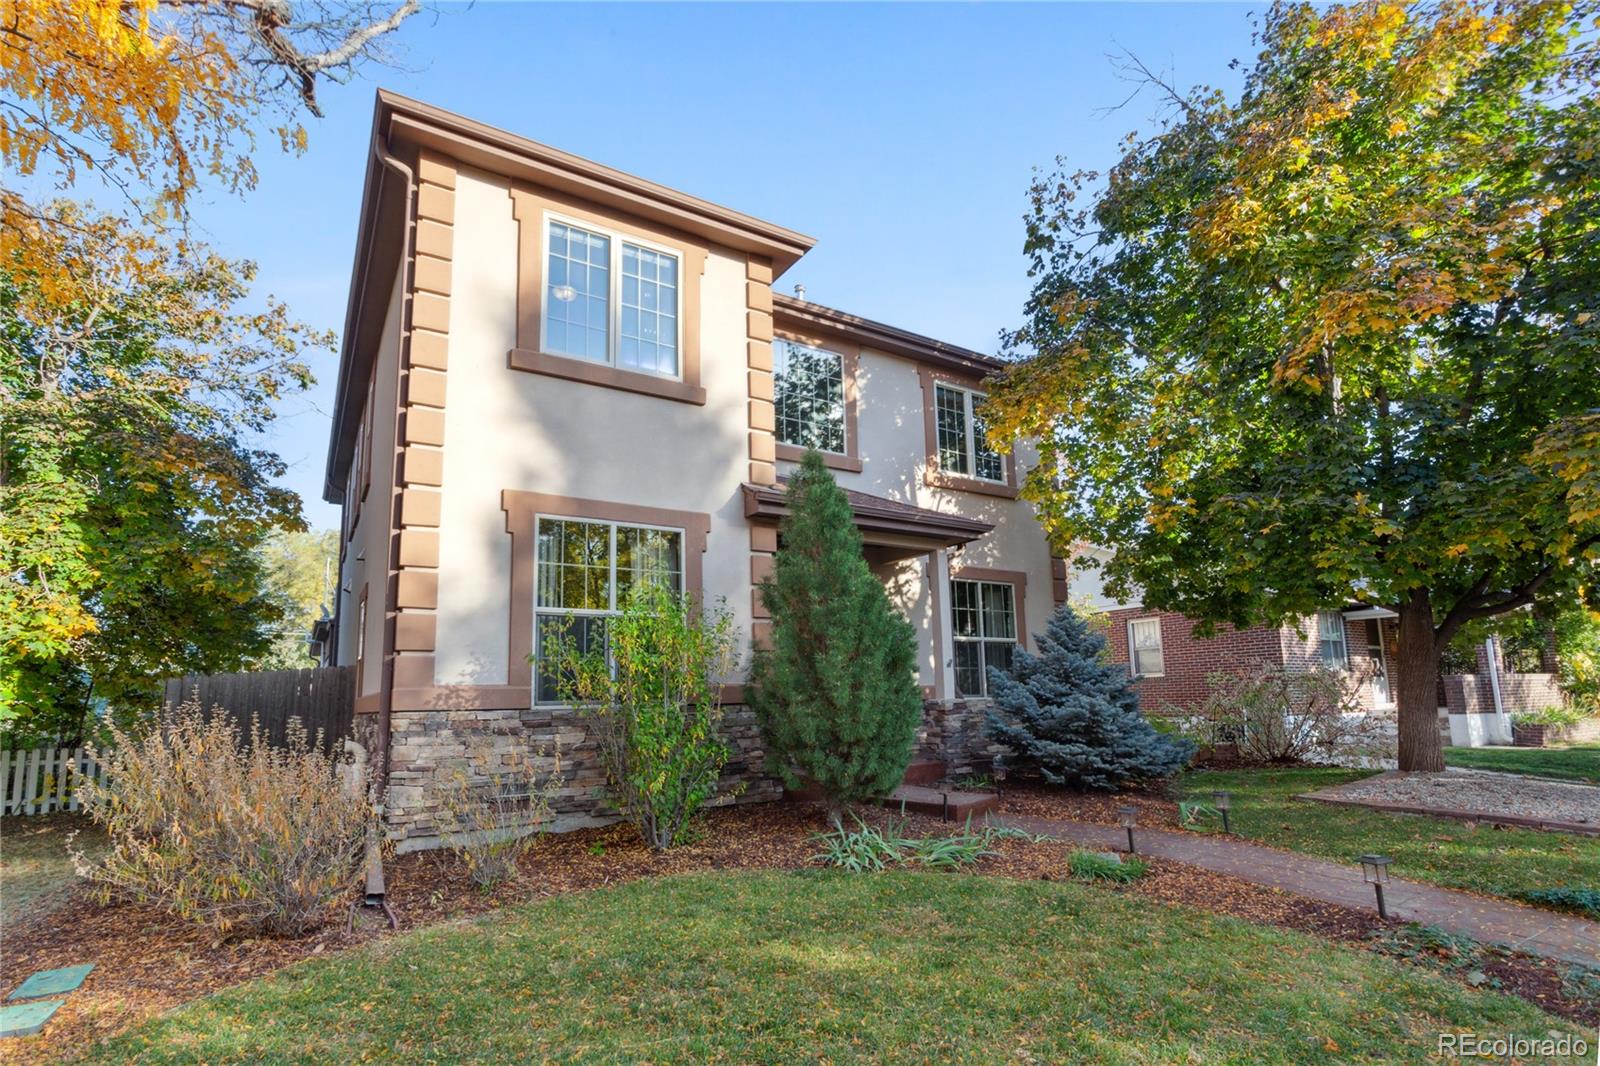 1770 s corona street, Denver sold home. Closed on 2024-01-05 for $1,680,000.